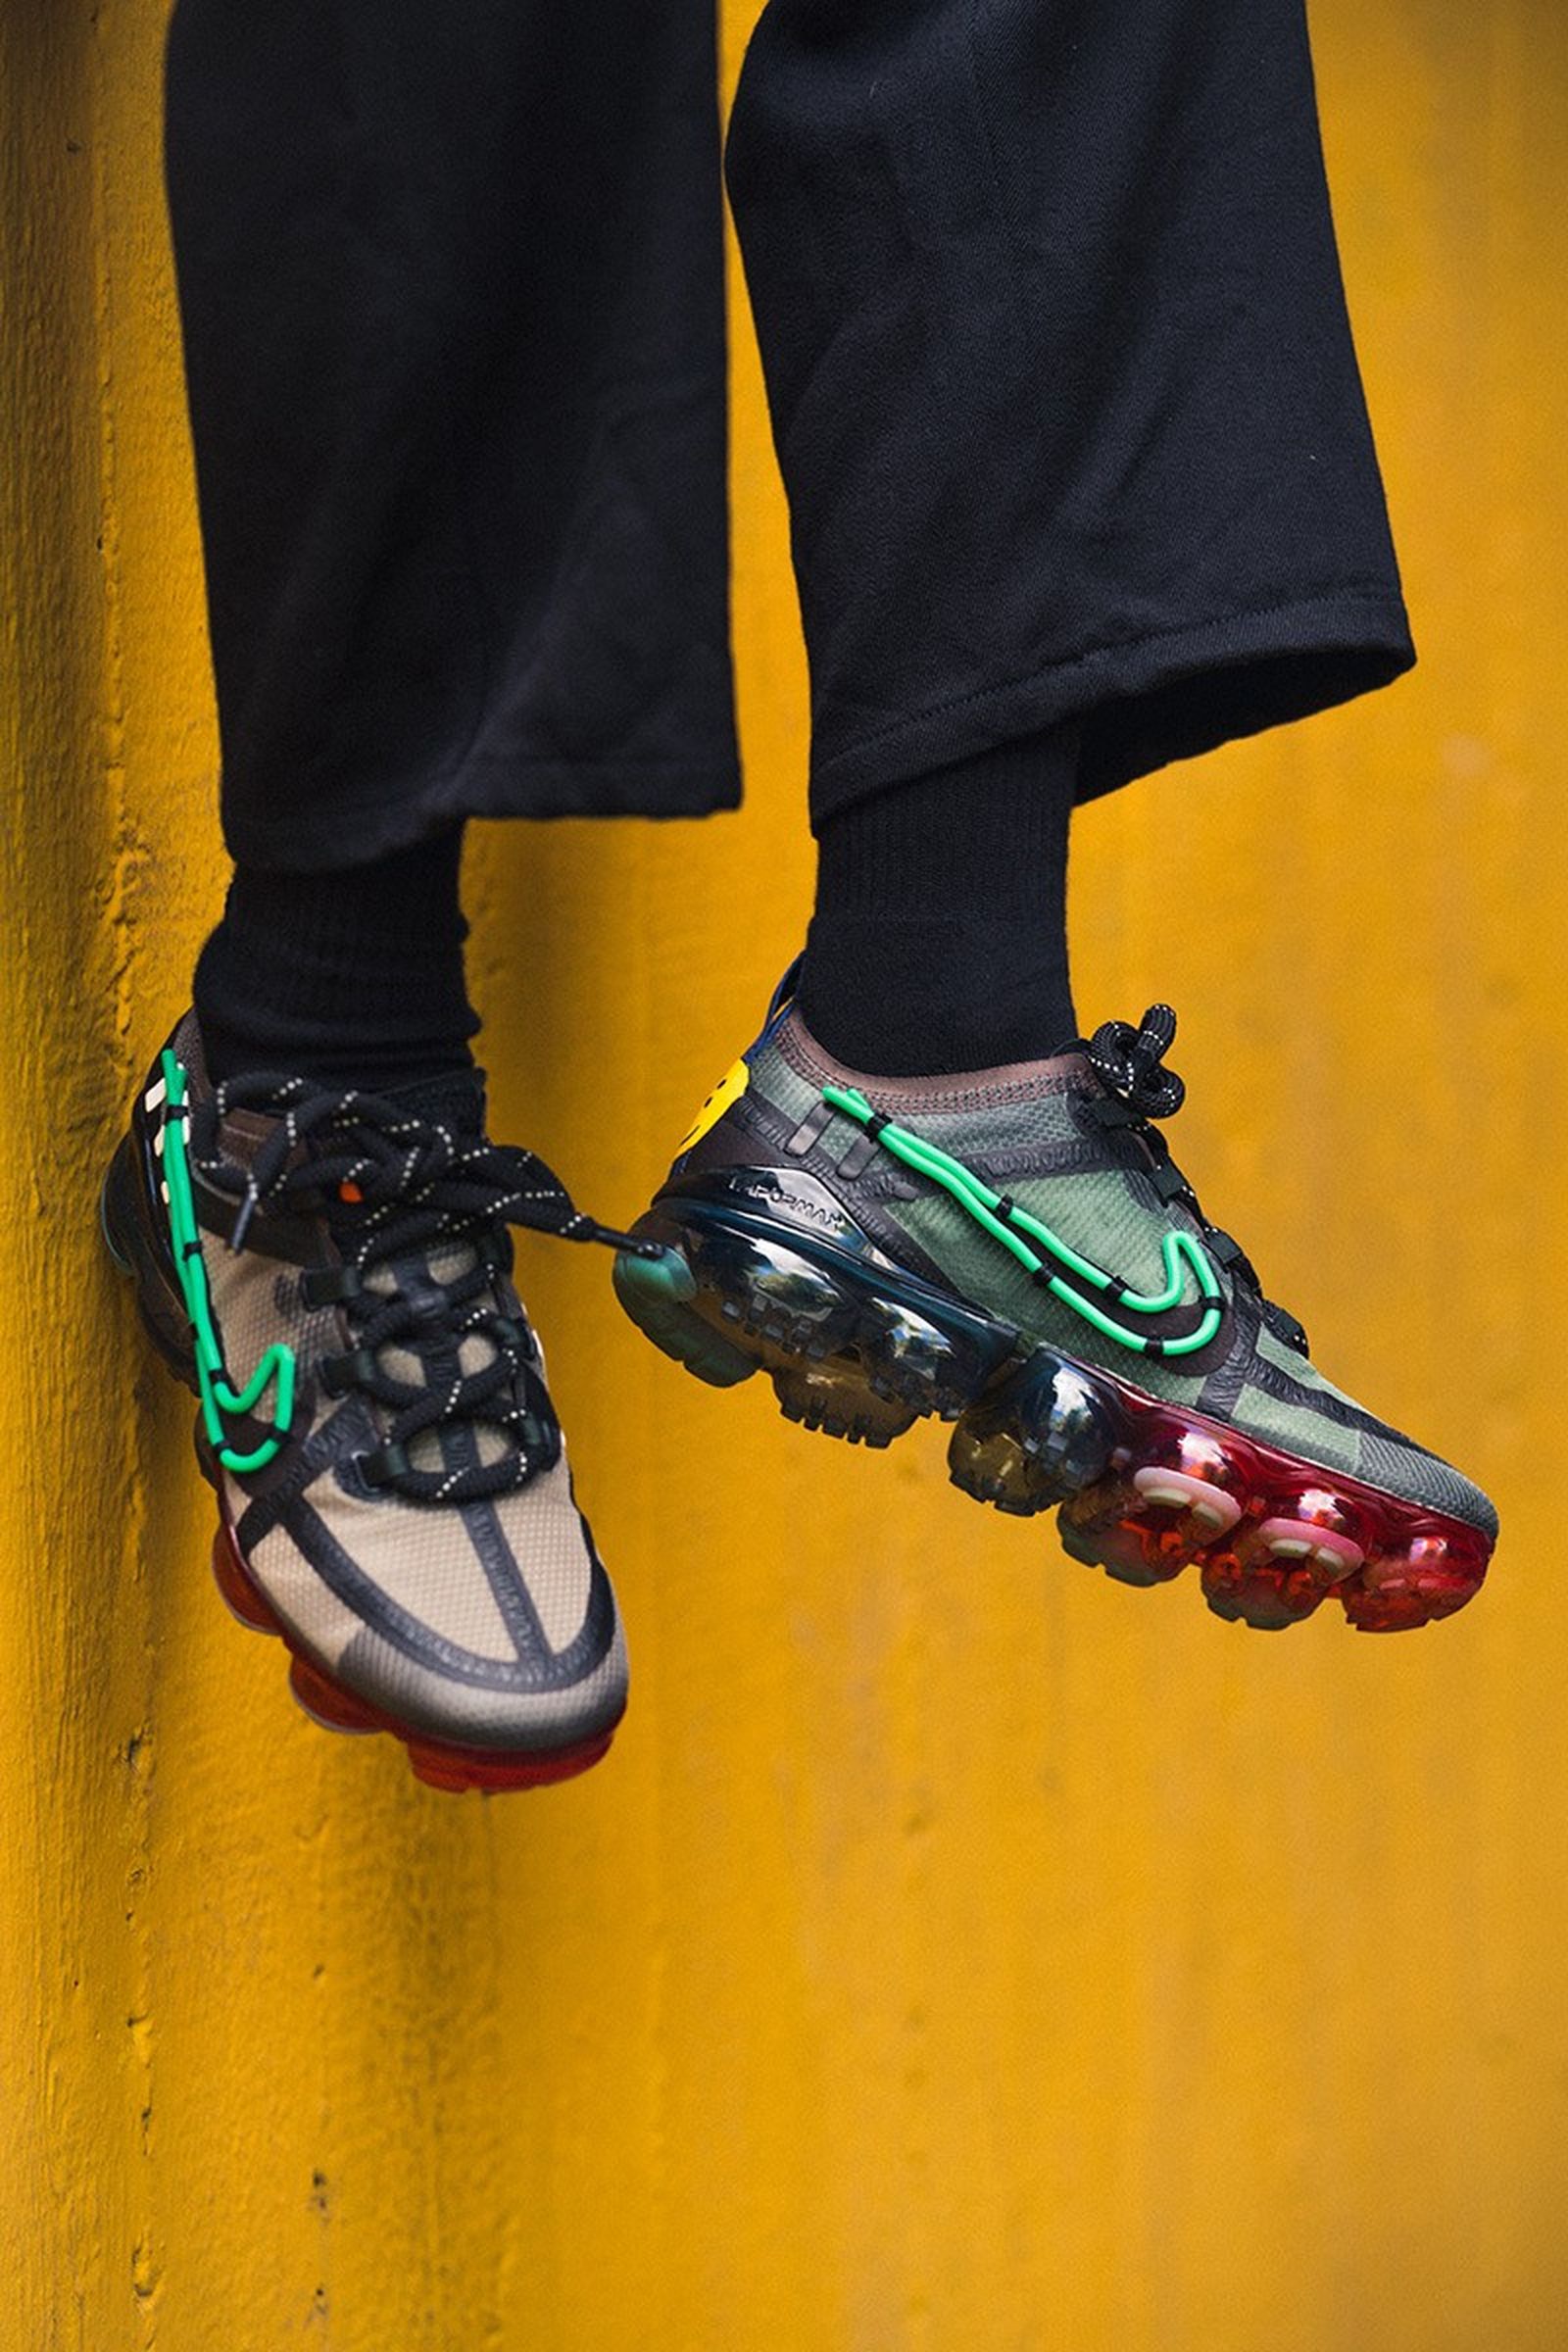 best sneakers 2019 nike vapormax CPFM Girls Don't Cry Martine Rose comme des garcons